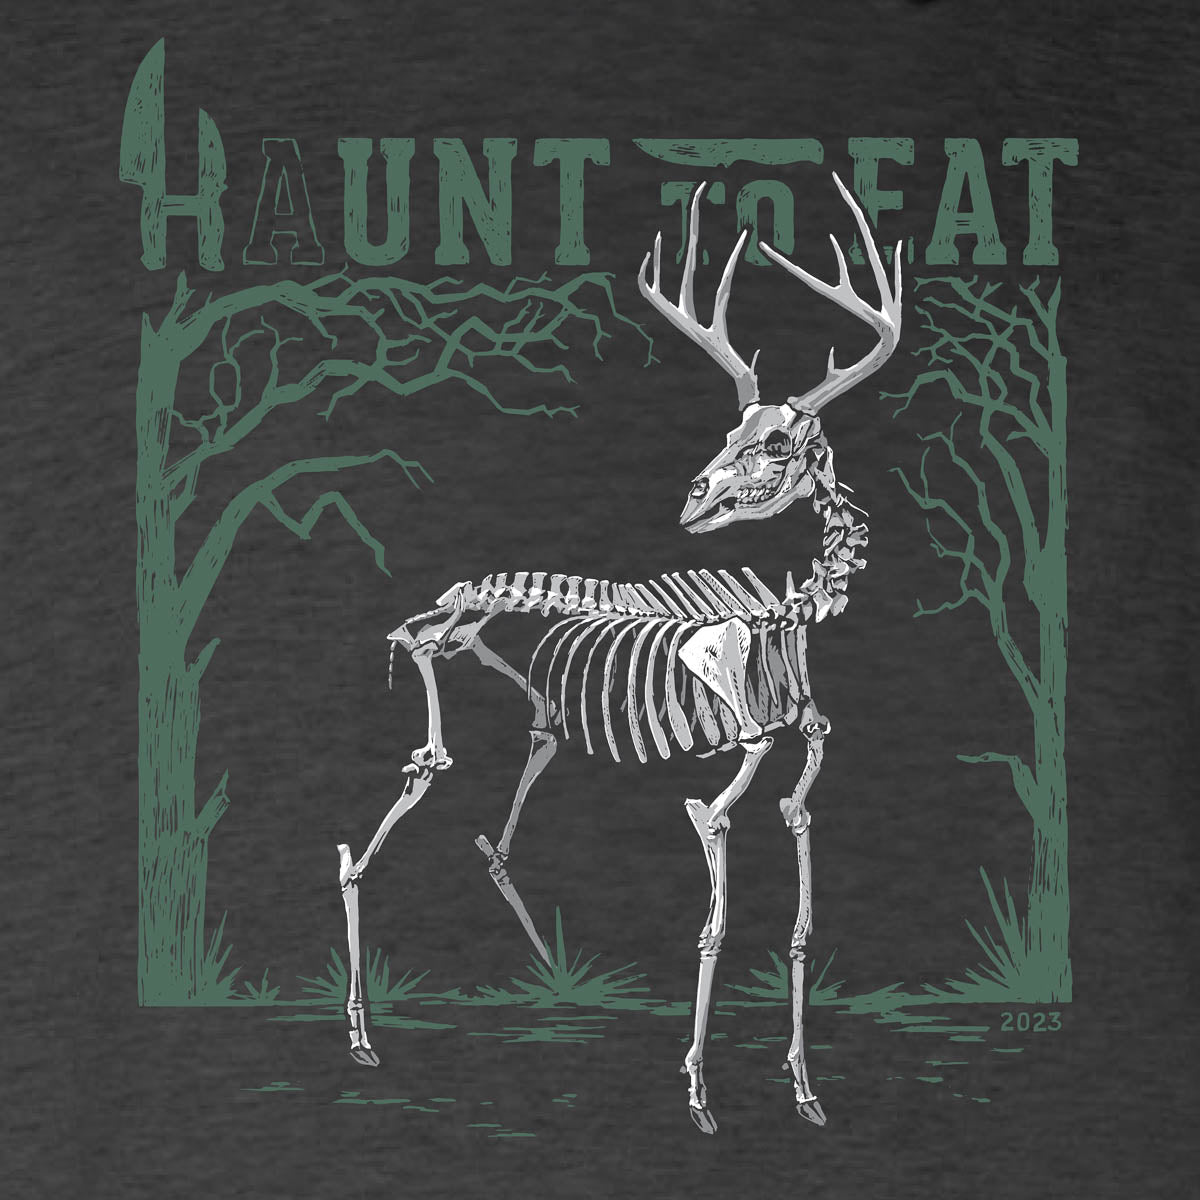 Charcoal heather hooded sweatshirt with a skeleton deer design.  Haunt to eat written on the top of the design. this design is featured to have glow in the dark pigments.